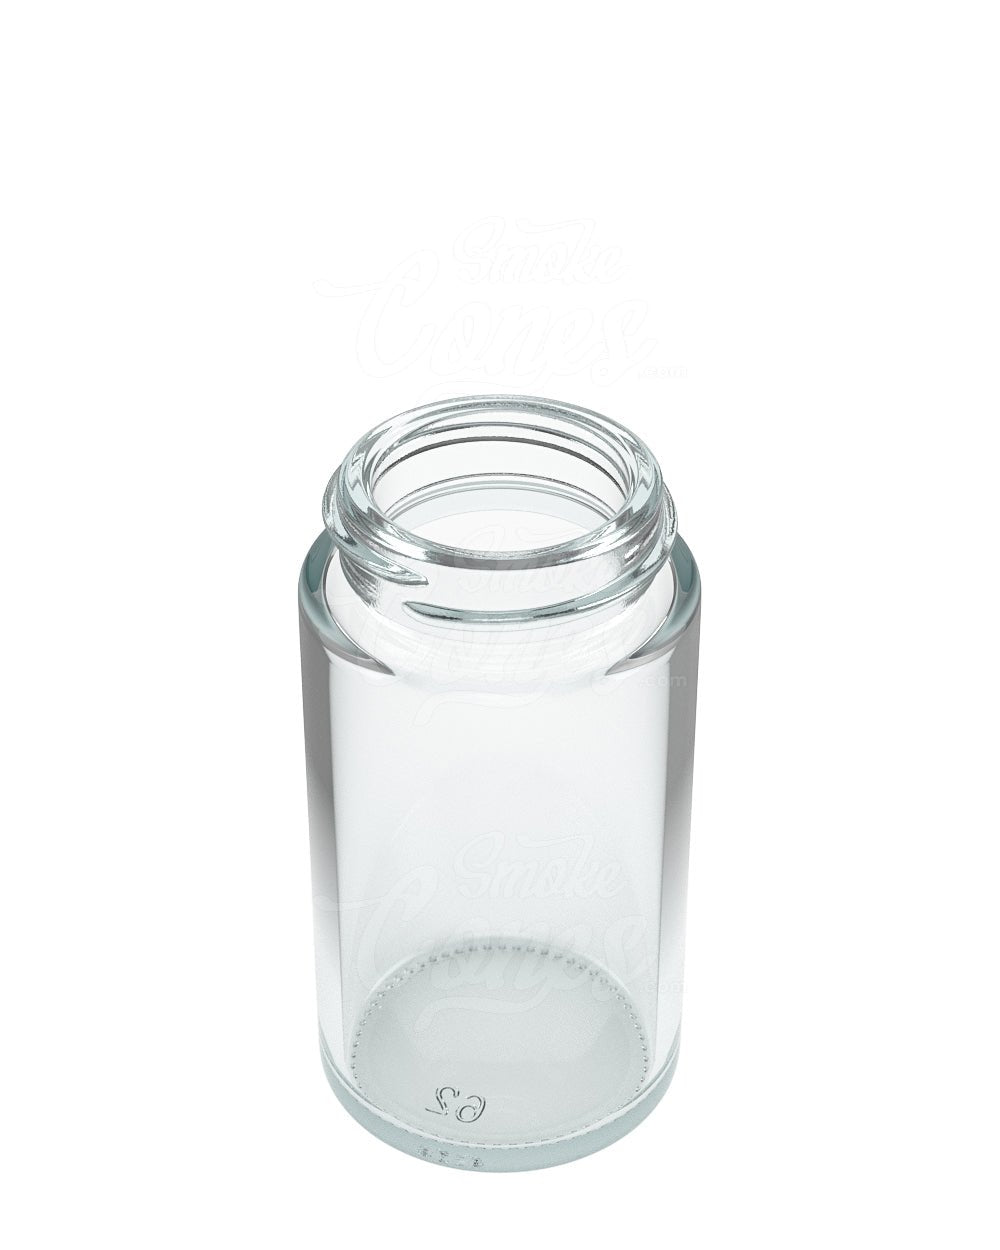 Precleaned Clear Tall Straight Sided Wide Mouth Jars, Assembled